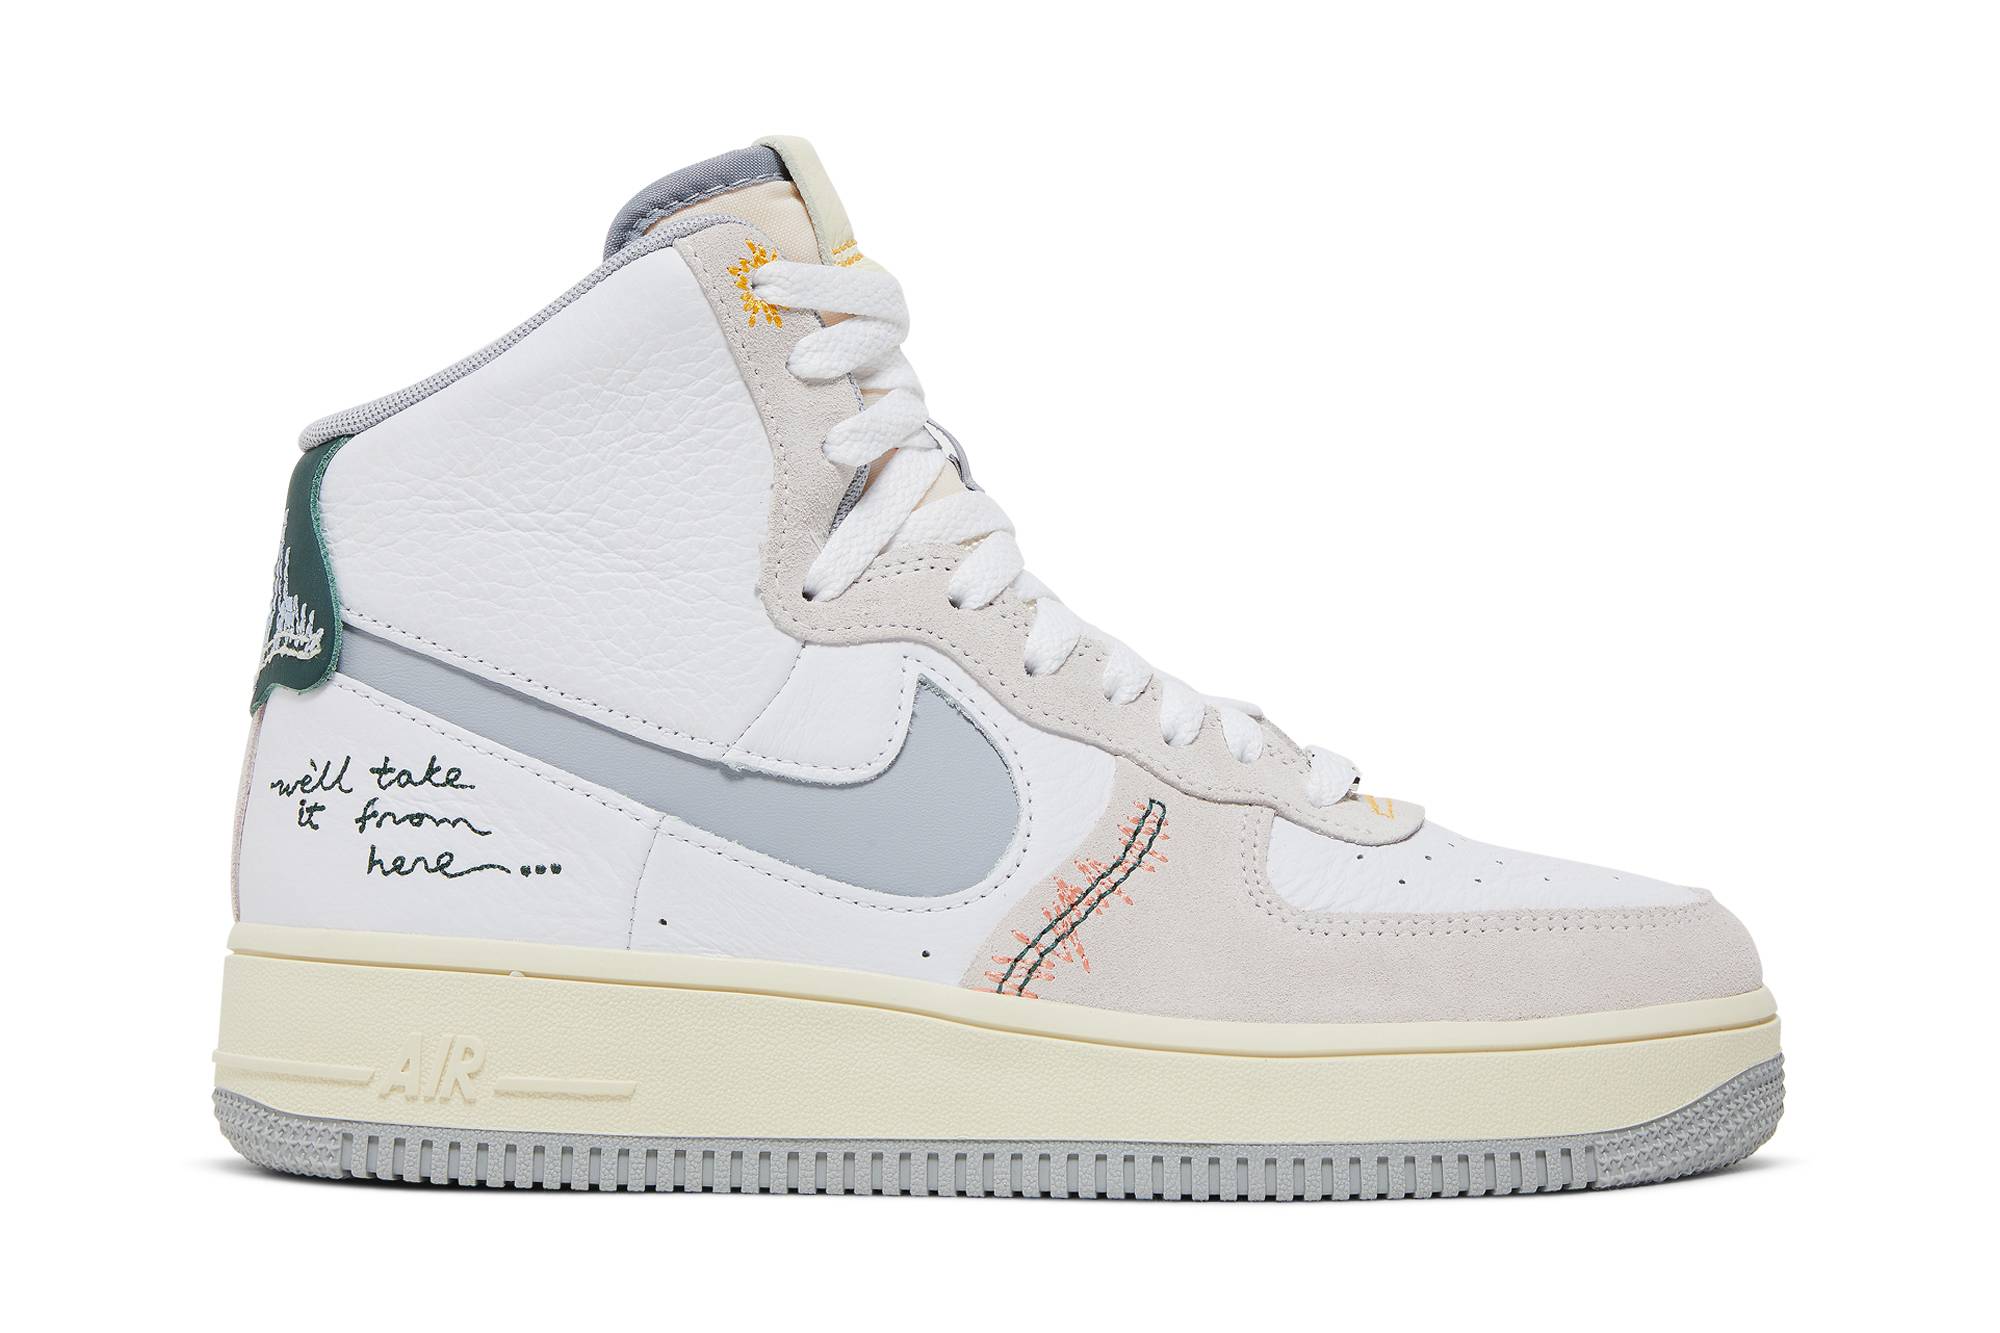 Women's Nike Air Force 1 High - "We'll Take It From Here"